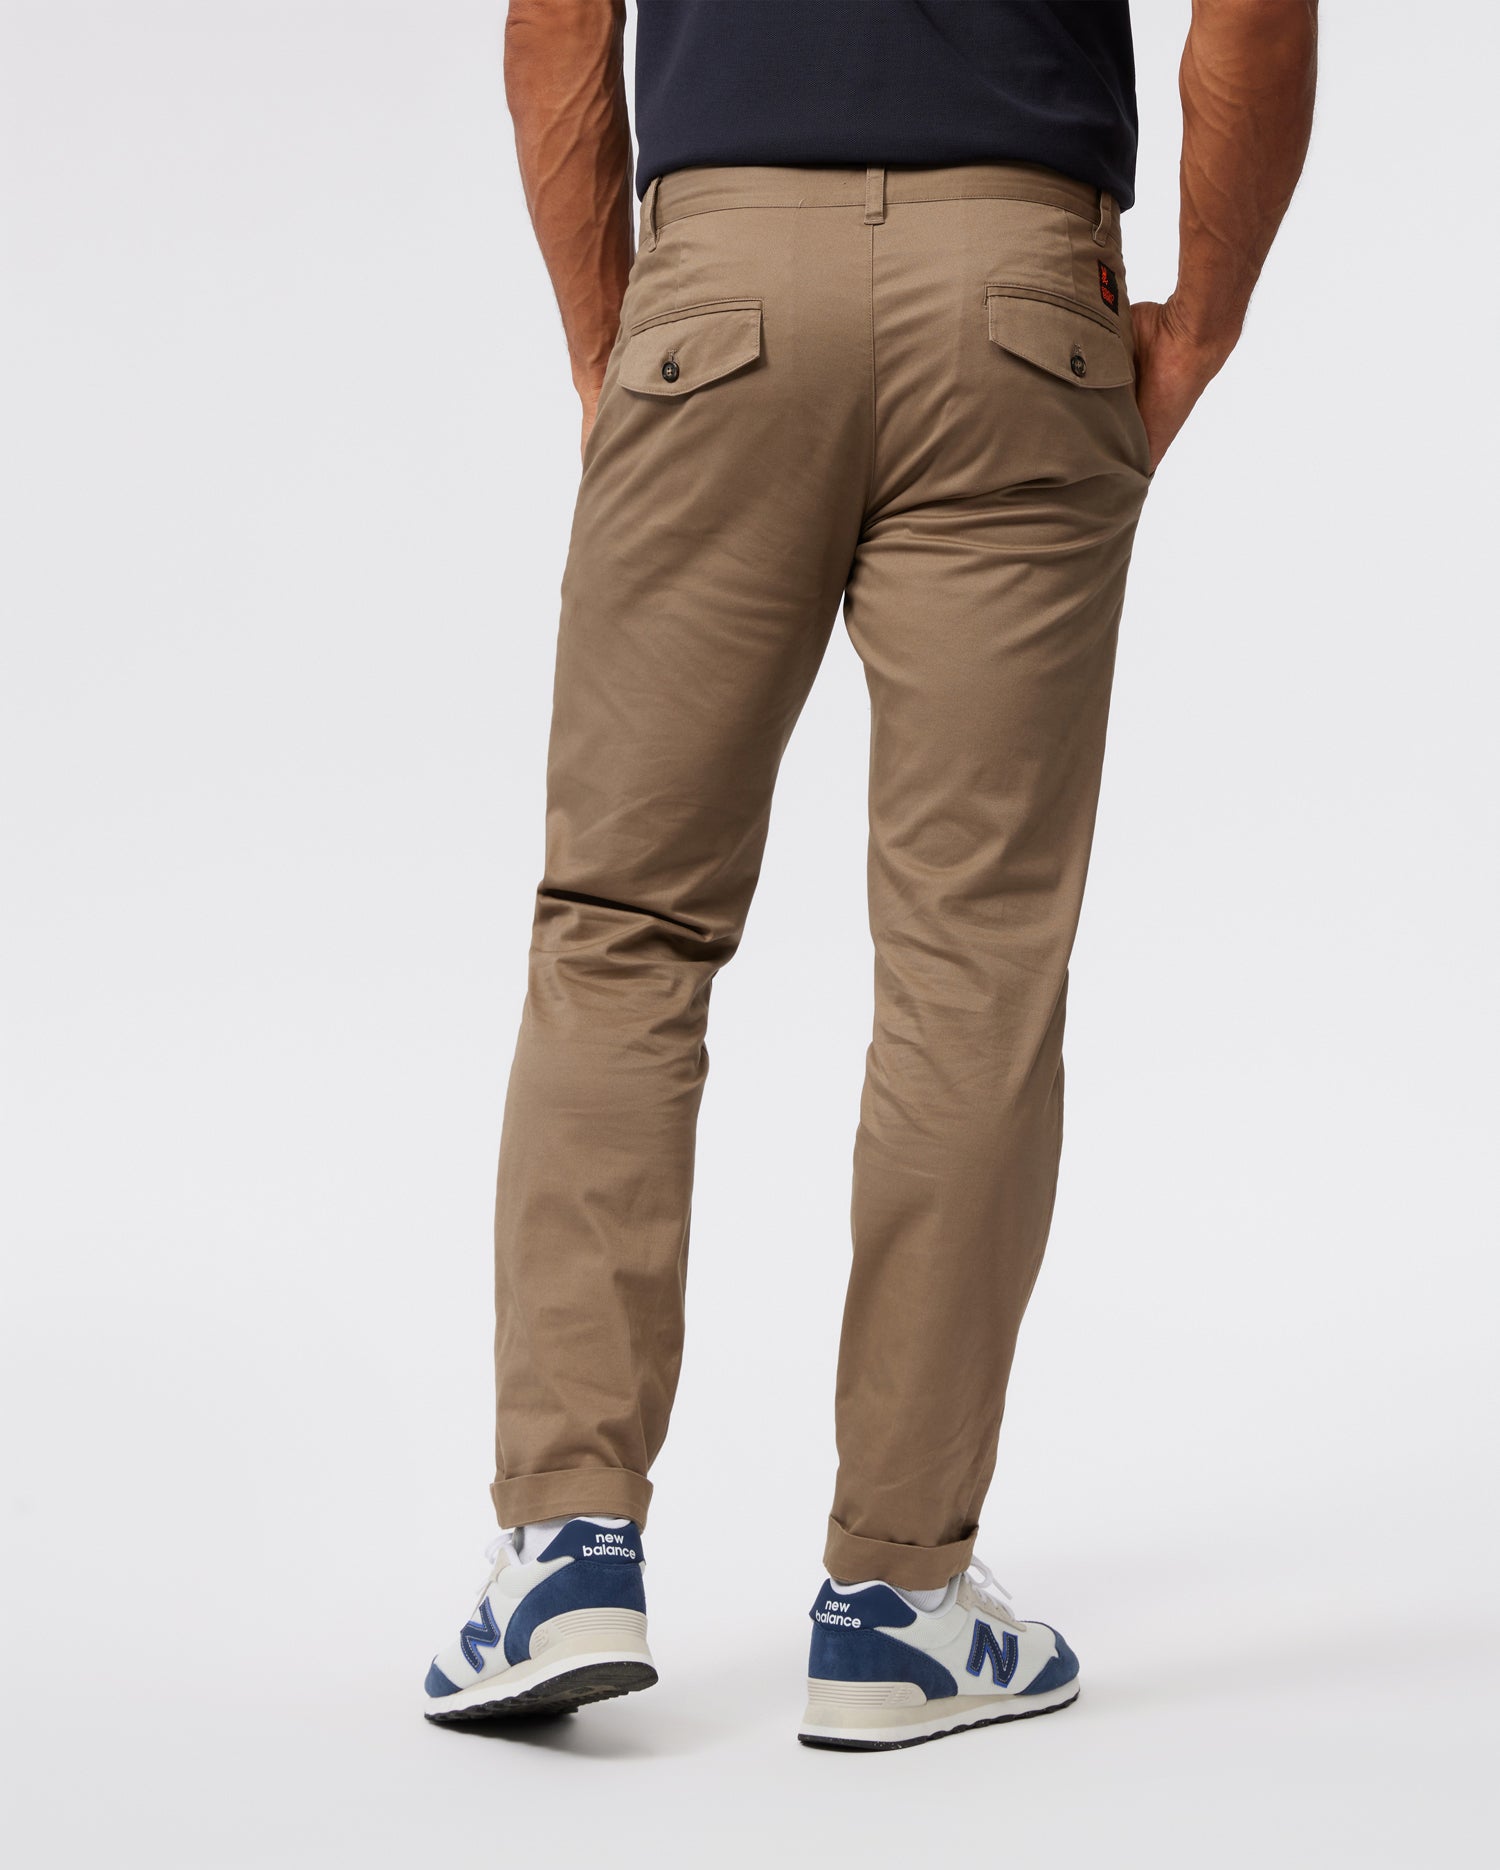 Tommy Hilfiger men's Stretch Chino in Slim Fit Casual Pants, Mallet, 30W x  30L US at Amazon Men's Clothing store